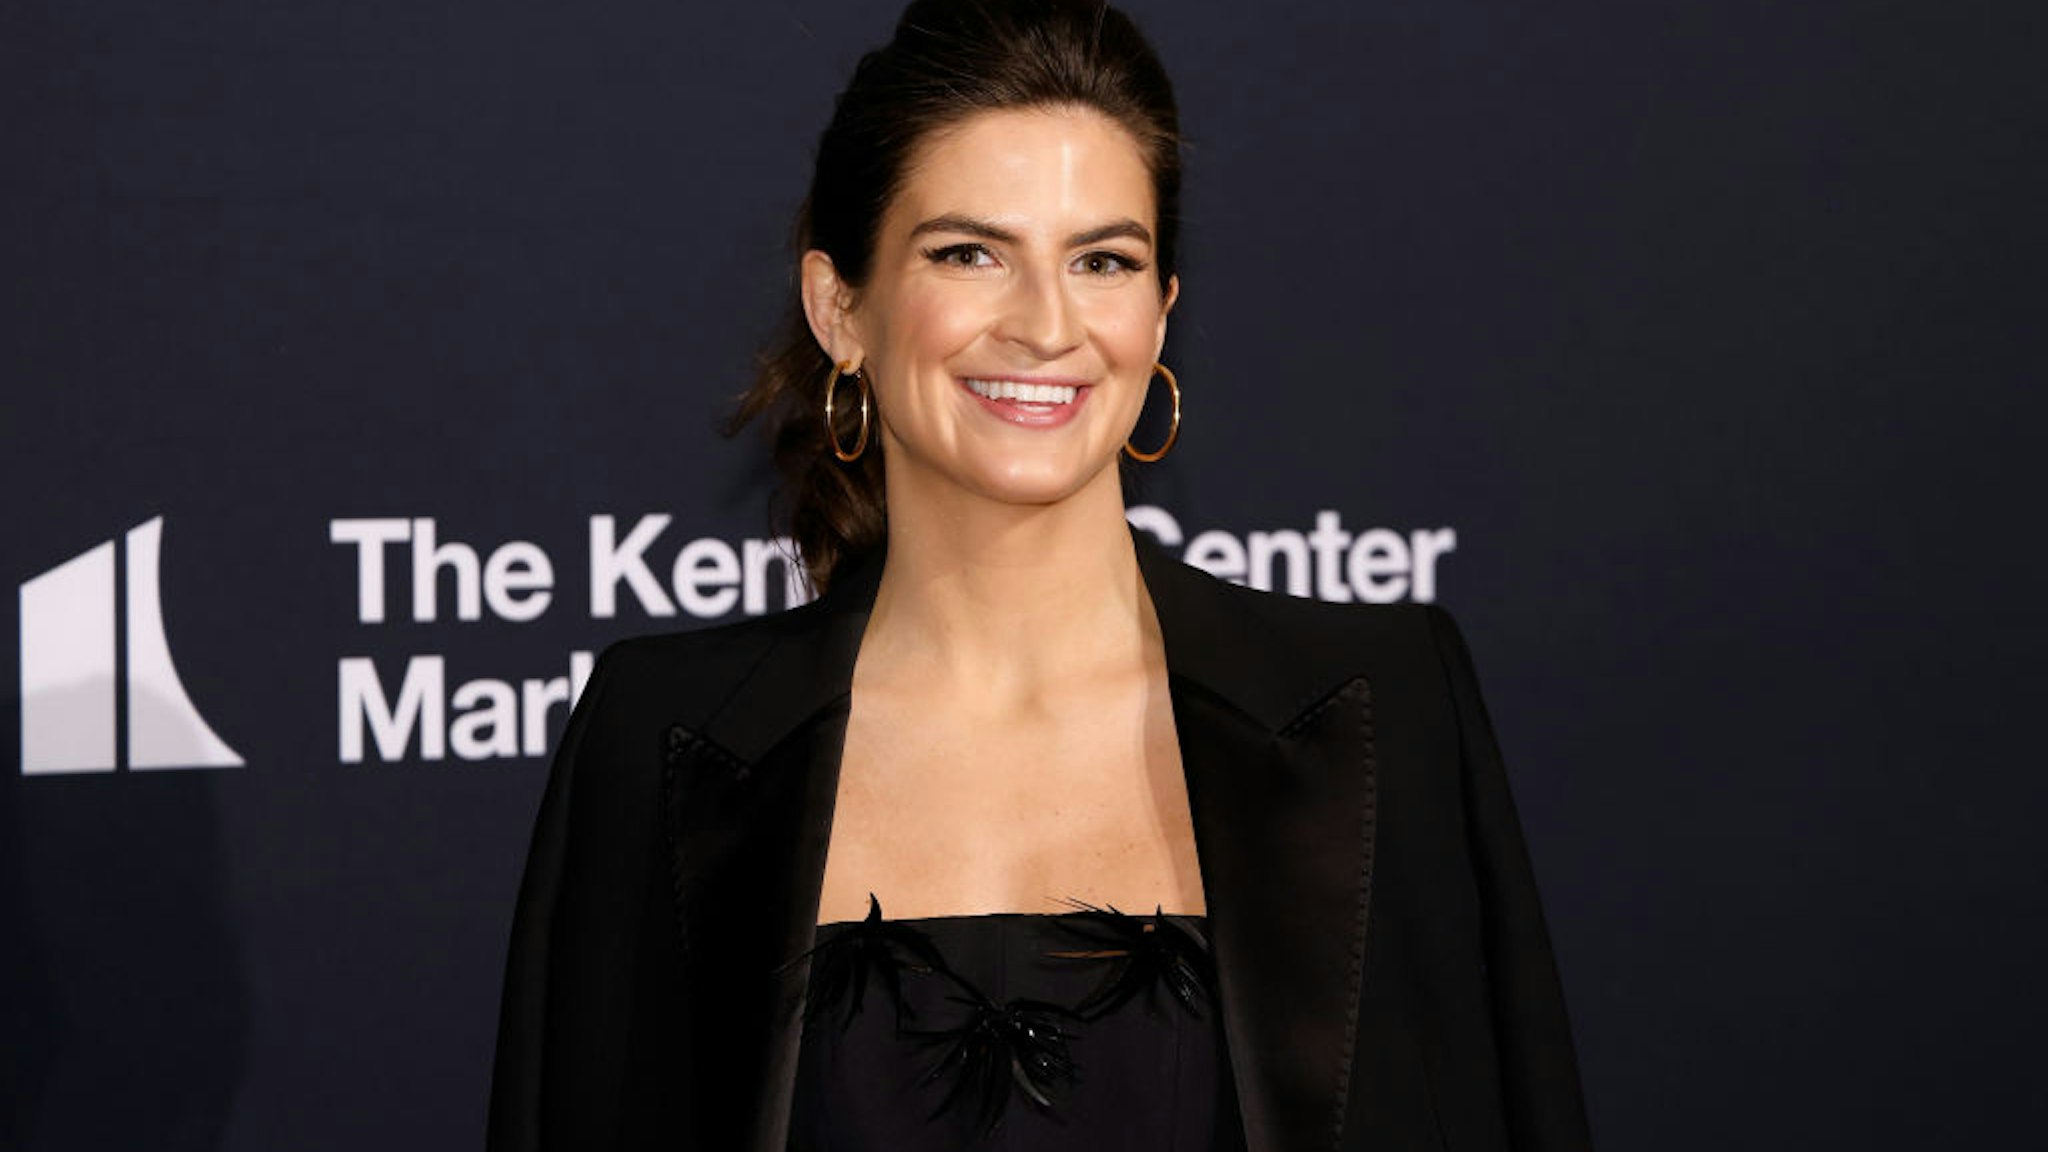 WASHINGTON, DC - MARCH 19: Kaitlan Collins attends the 2023 Mark Twain Prize for American Humor presentation at The Kennedy Center on March 19, 2023 in Washington, DC. (Photo by Taylor Hill/WireImage)